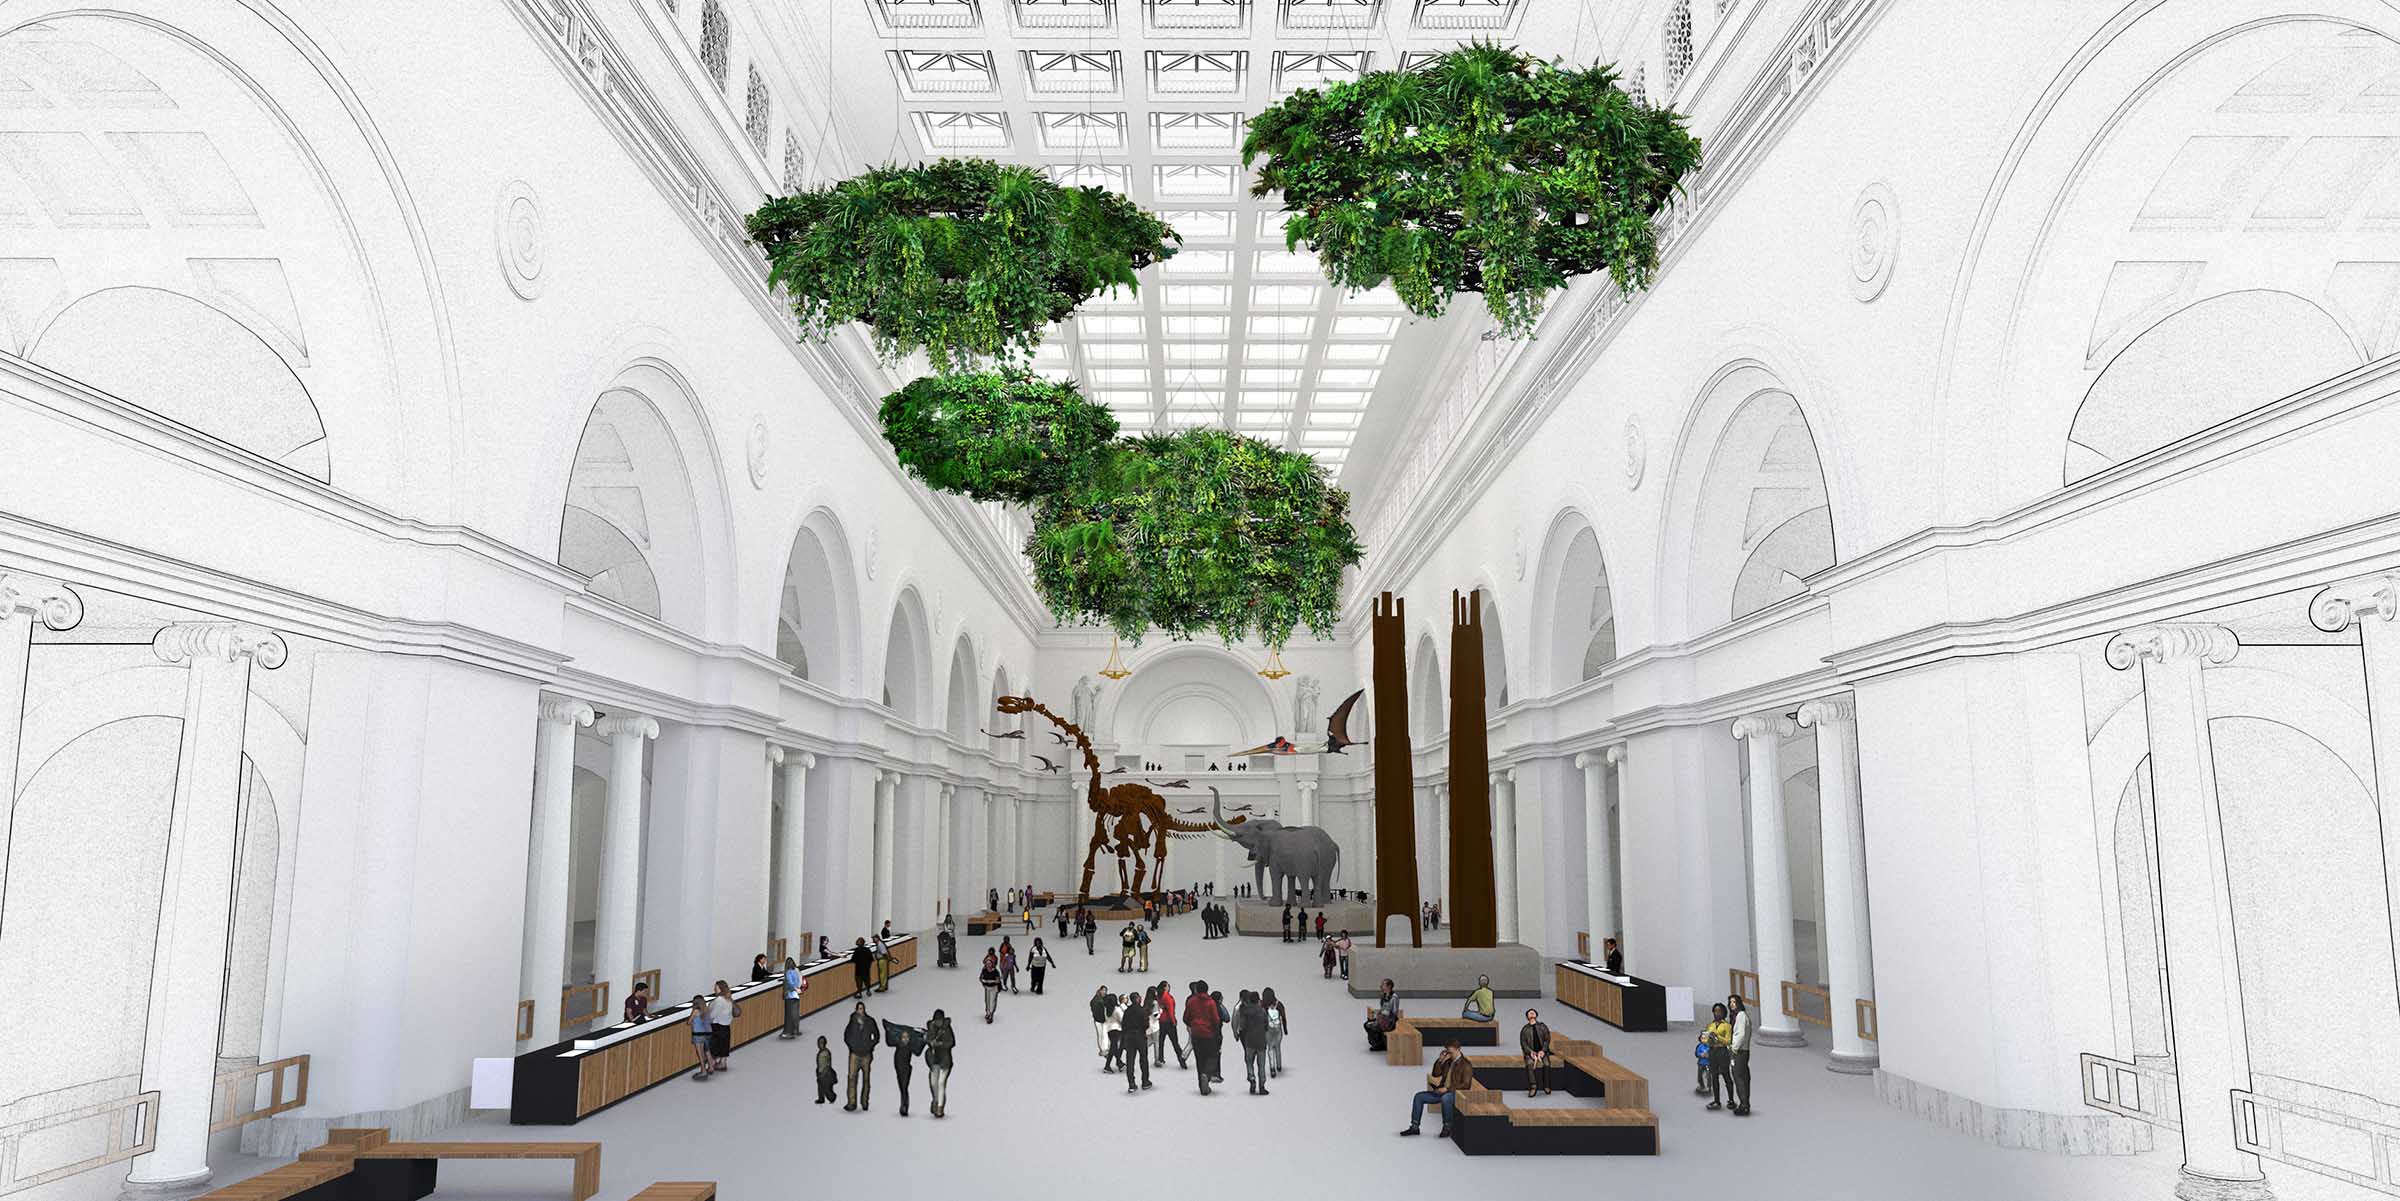 Rendering of the interior of a large, white classical building with large green gardens hanging from the ceiling